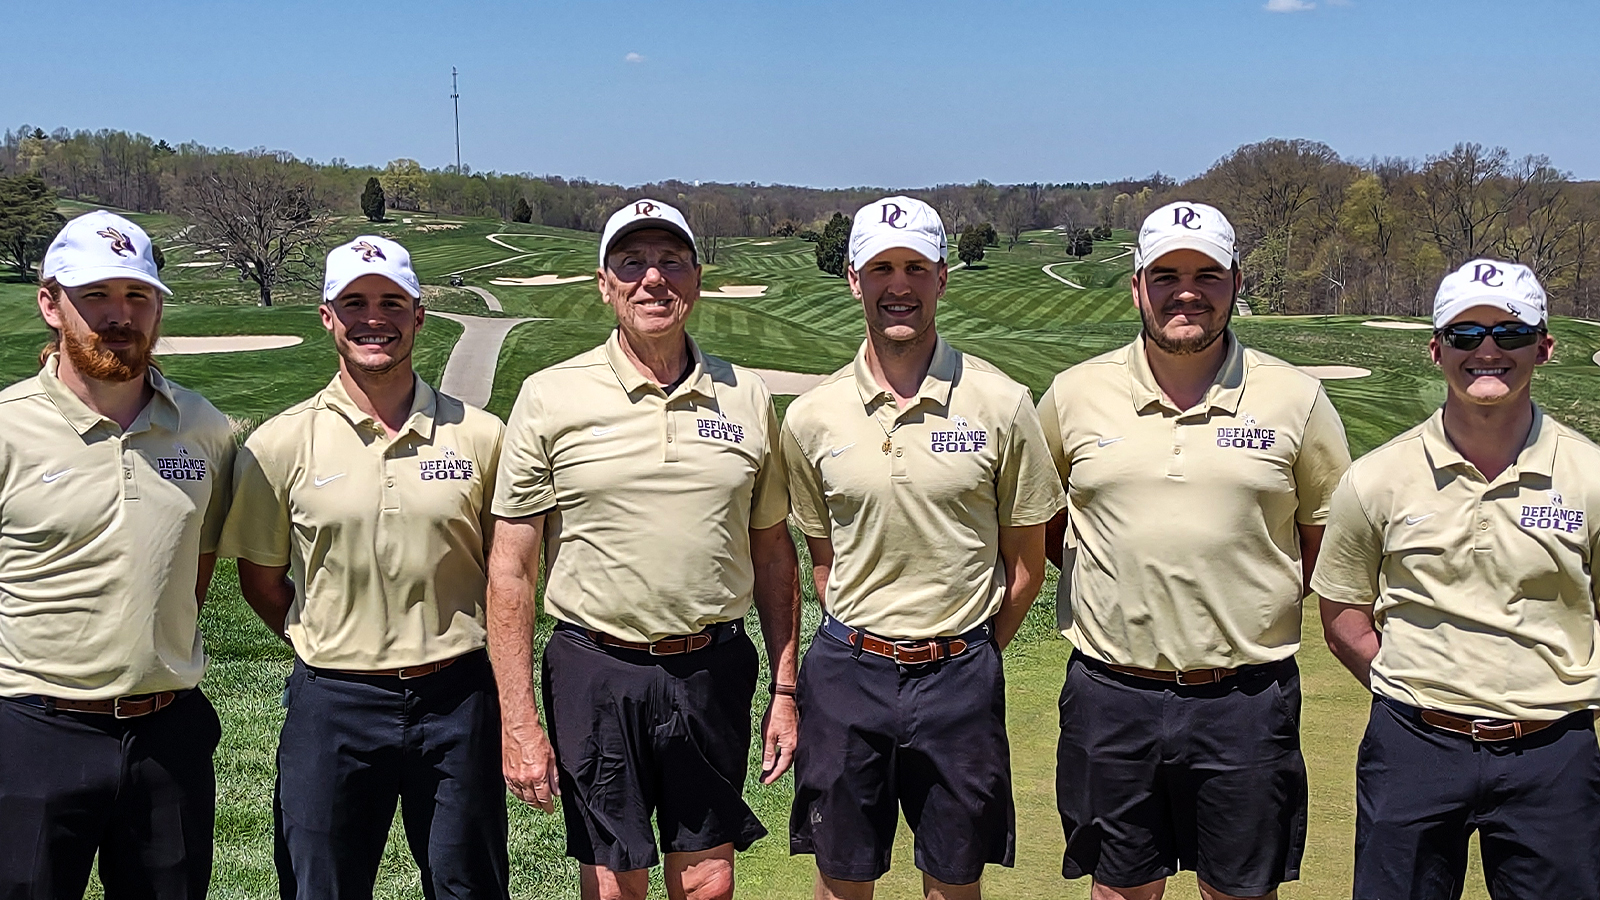 Men’s golf wraps up grueling 54-hole competition at French Lick